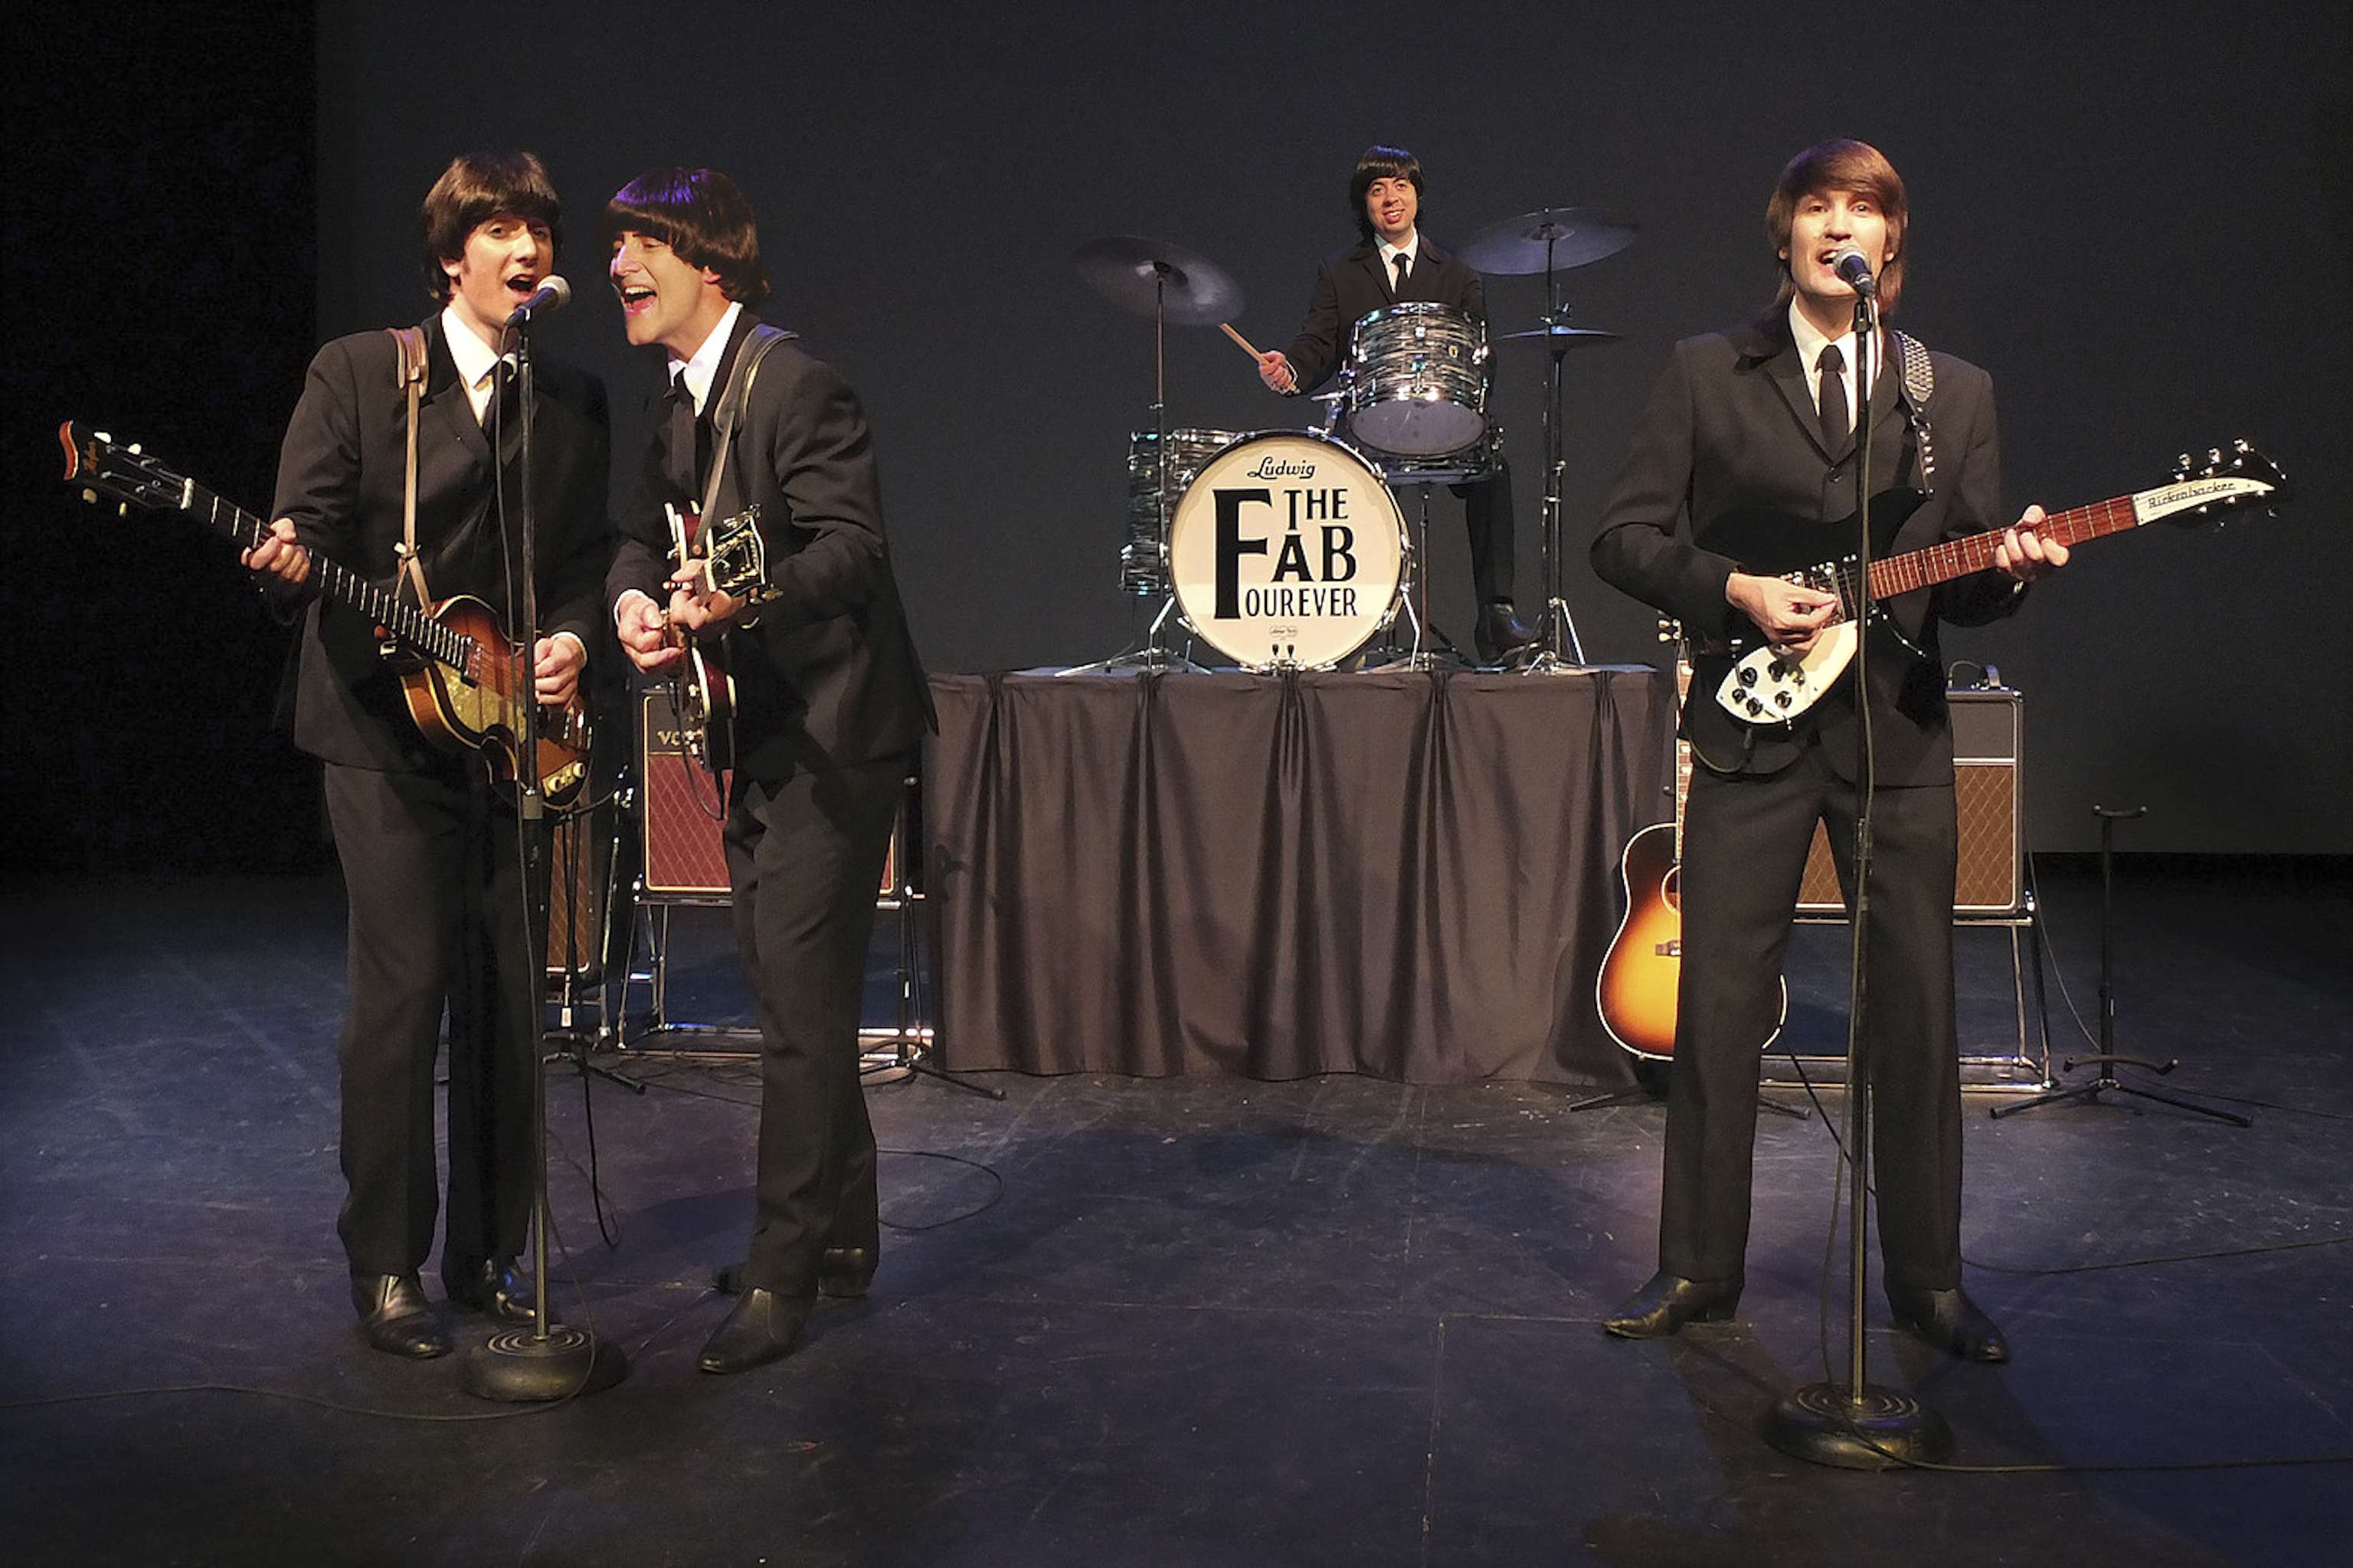 Yes, another Beatles tribute band are headed our way. For something a bit more highbrow, catch the talented players of the Asian Youth Orchestra and the peerless St Petersburg Ballet